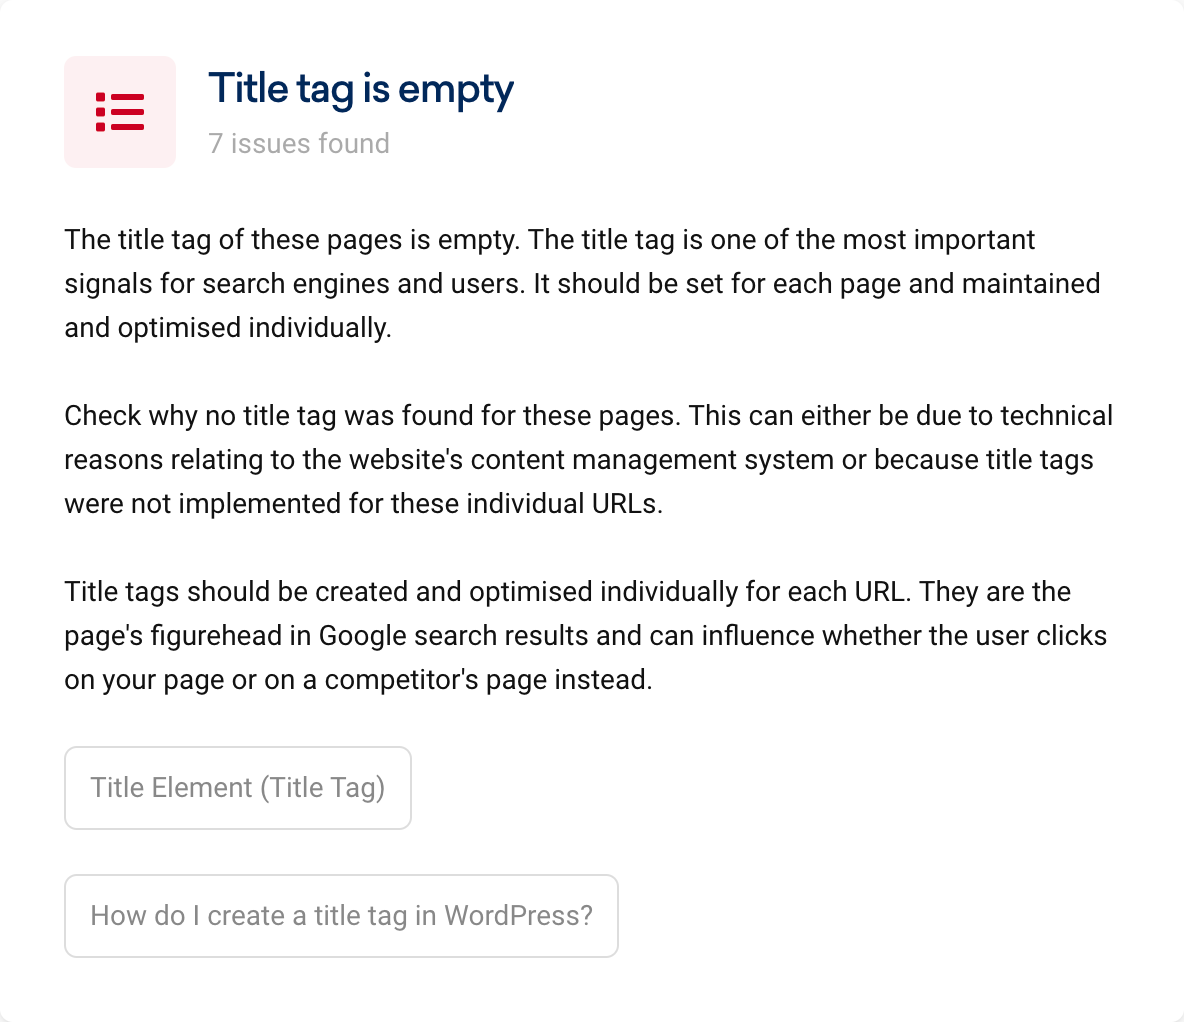 For example, there is the OnPage error that the title tag is empty. In SISTRIX, there is a detailed explanation of why this is a problem and how it can be fixed. In addition, there are buttons in the info box to a more detailed Ask SISTRIX article on the respective topic, and how to create a title tag in WordPress.